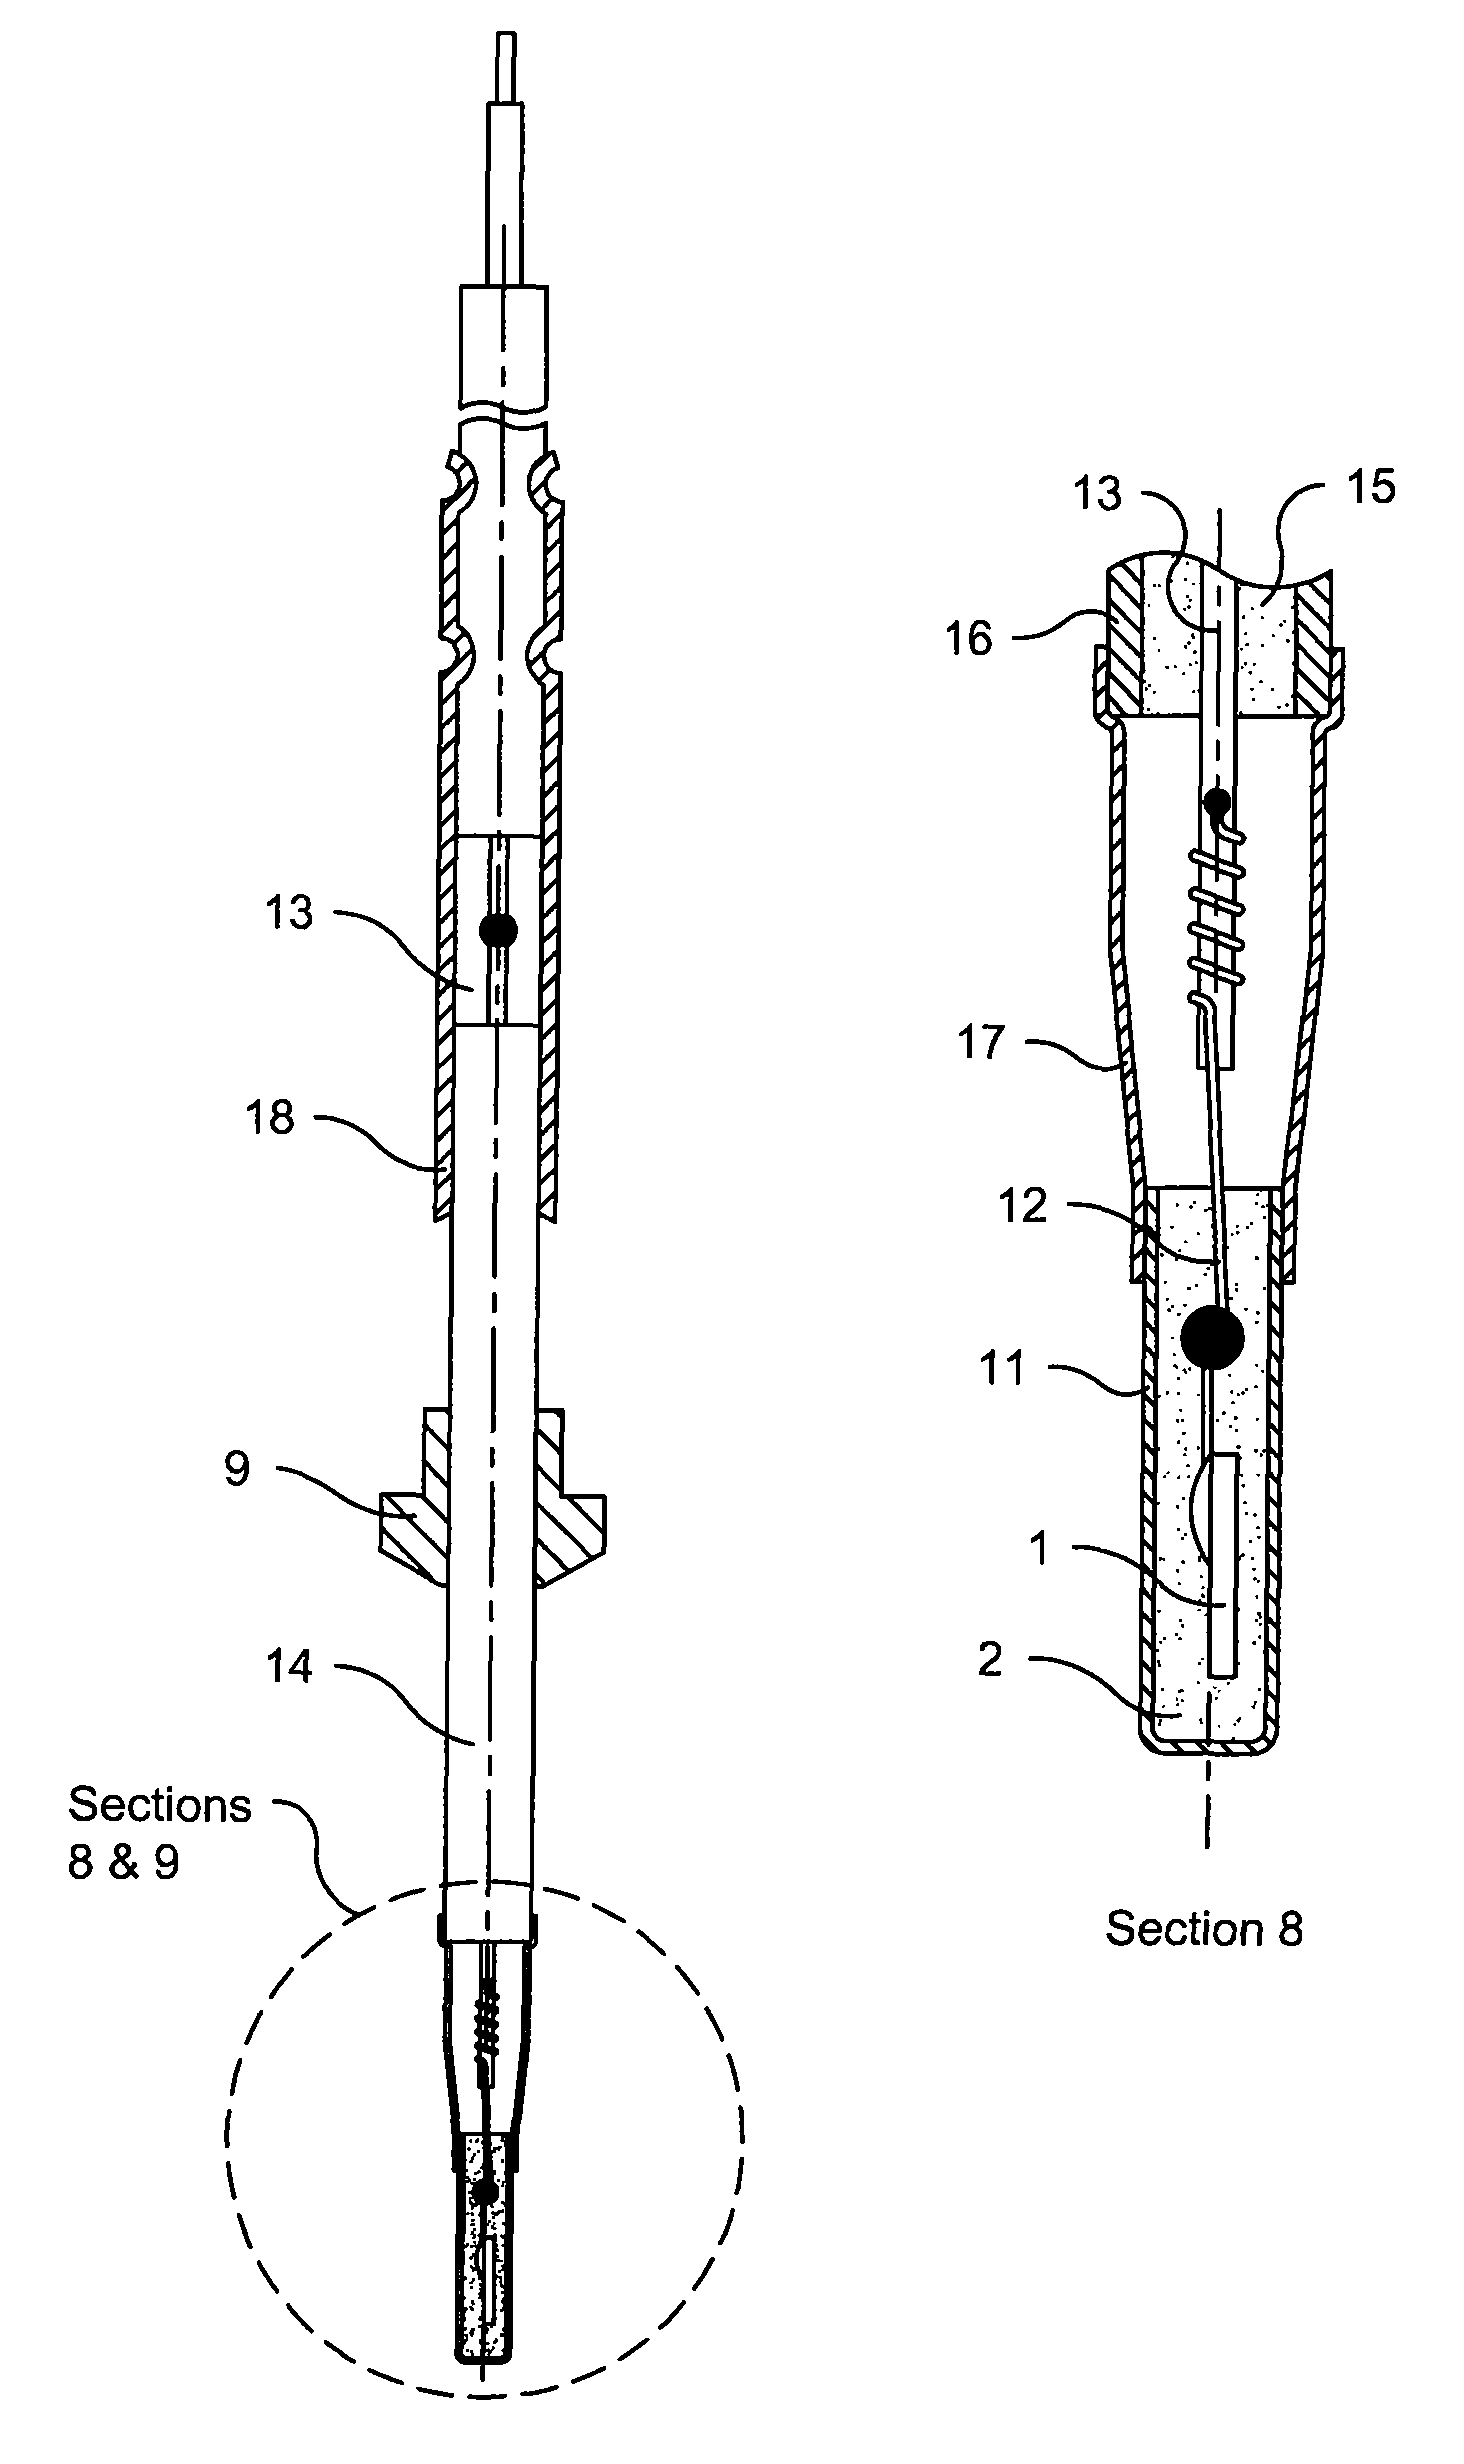 Turbocharger protection device